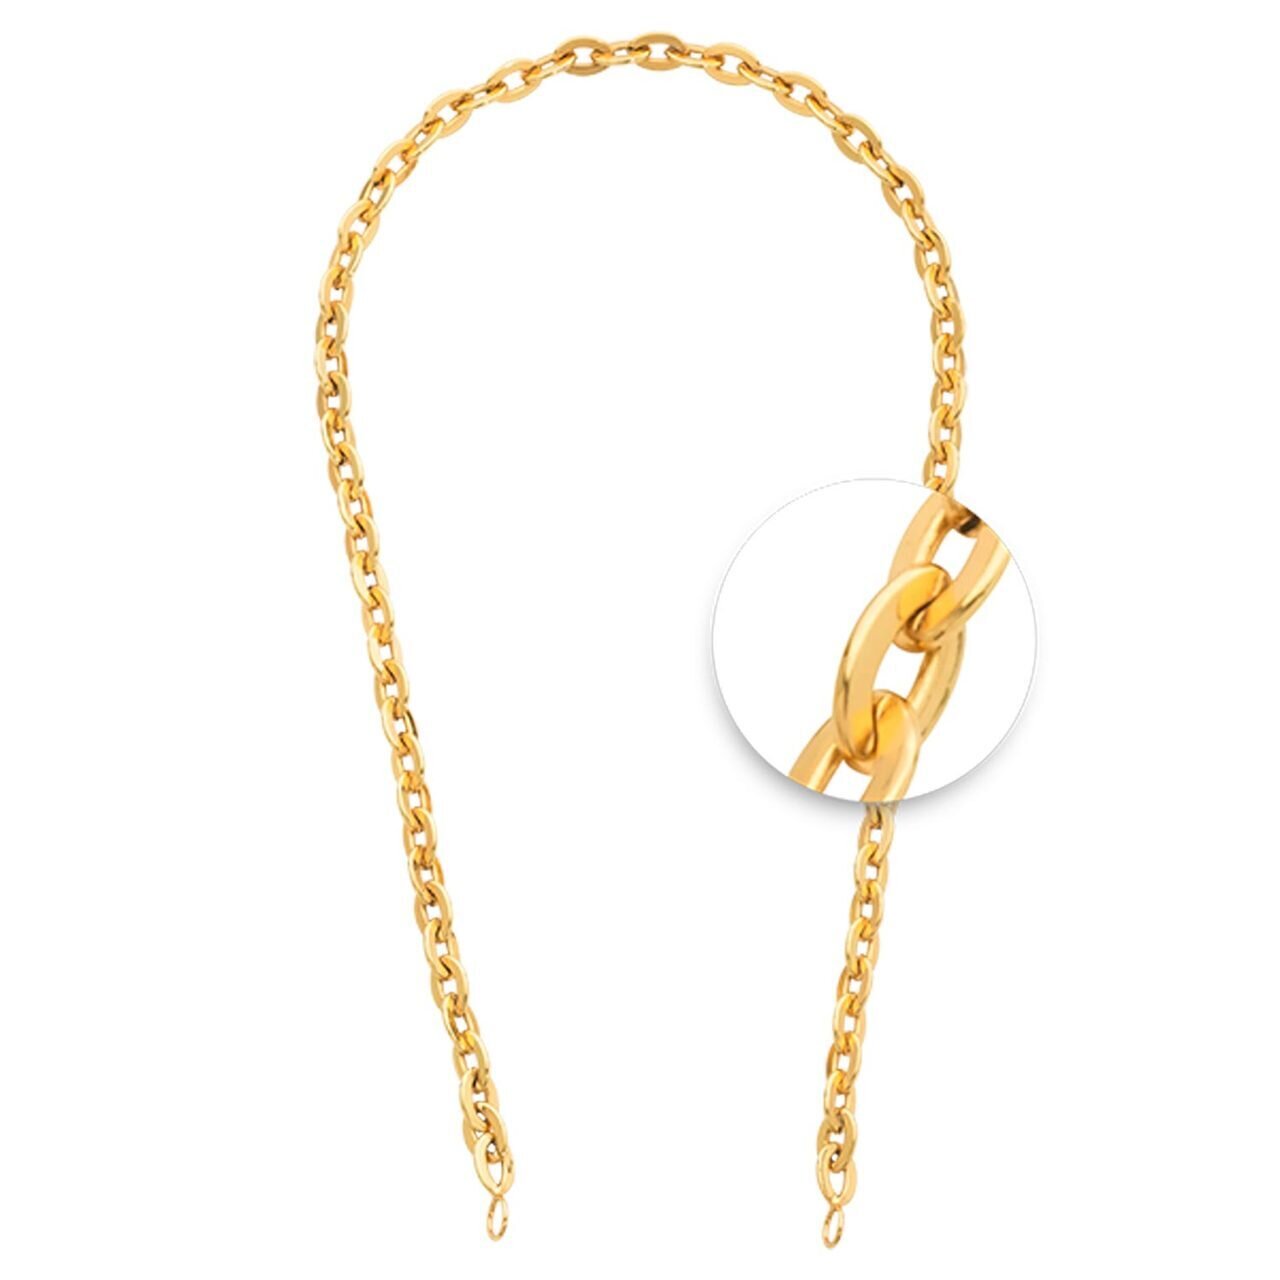 Nikki Lissoni Anchor Rolled Flat Cable Chain 6 x 8mm For Tags Gold-plated 40cm N1026G40